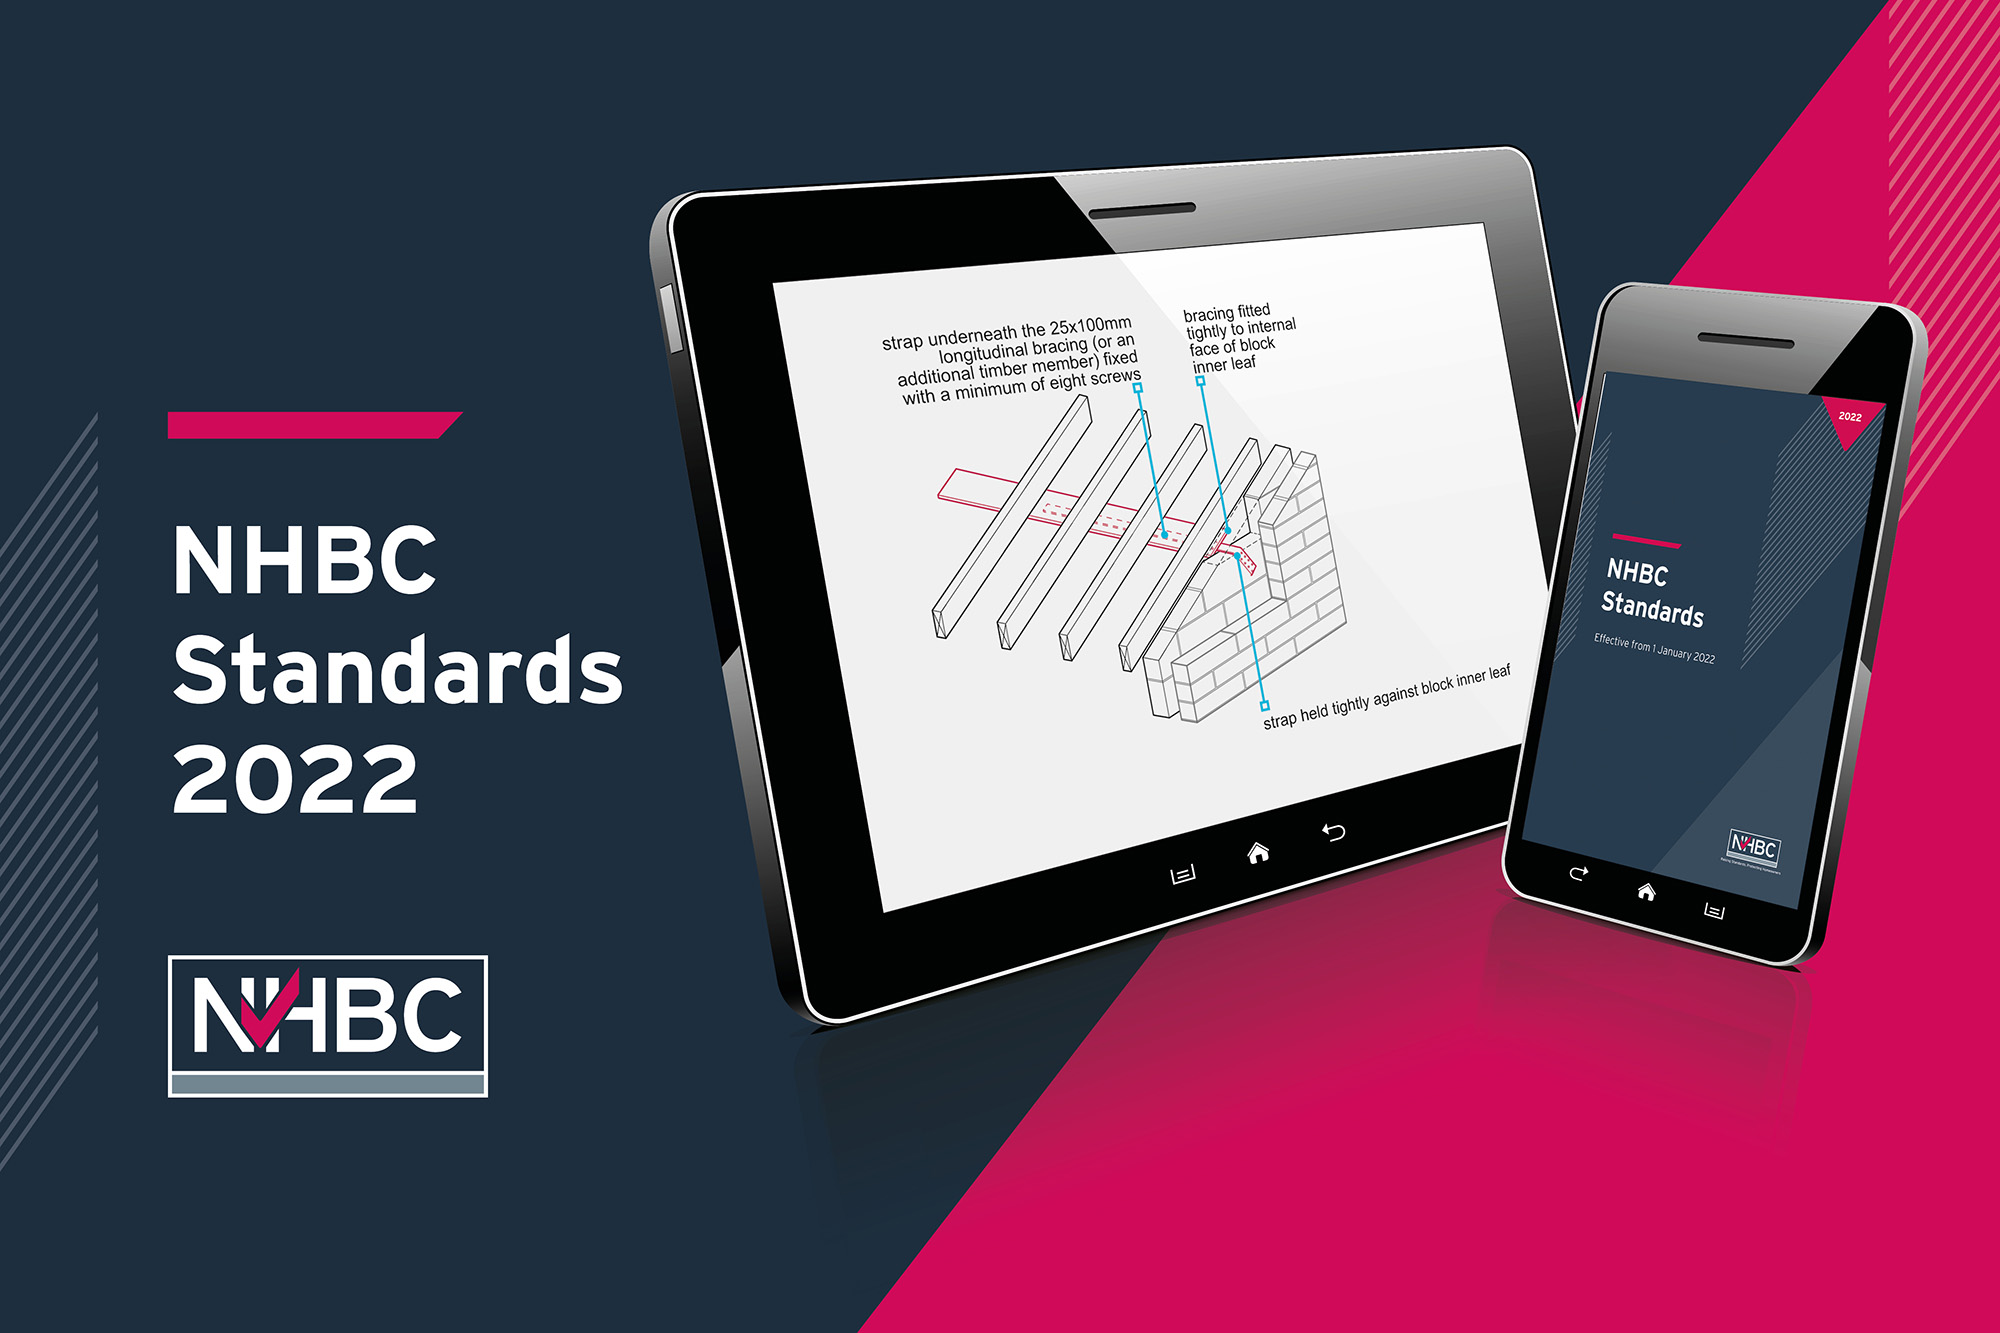 New NHBC Standards announced for 2022 @NHBC